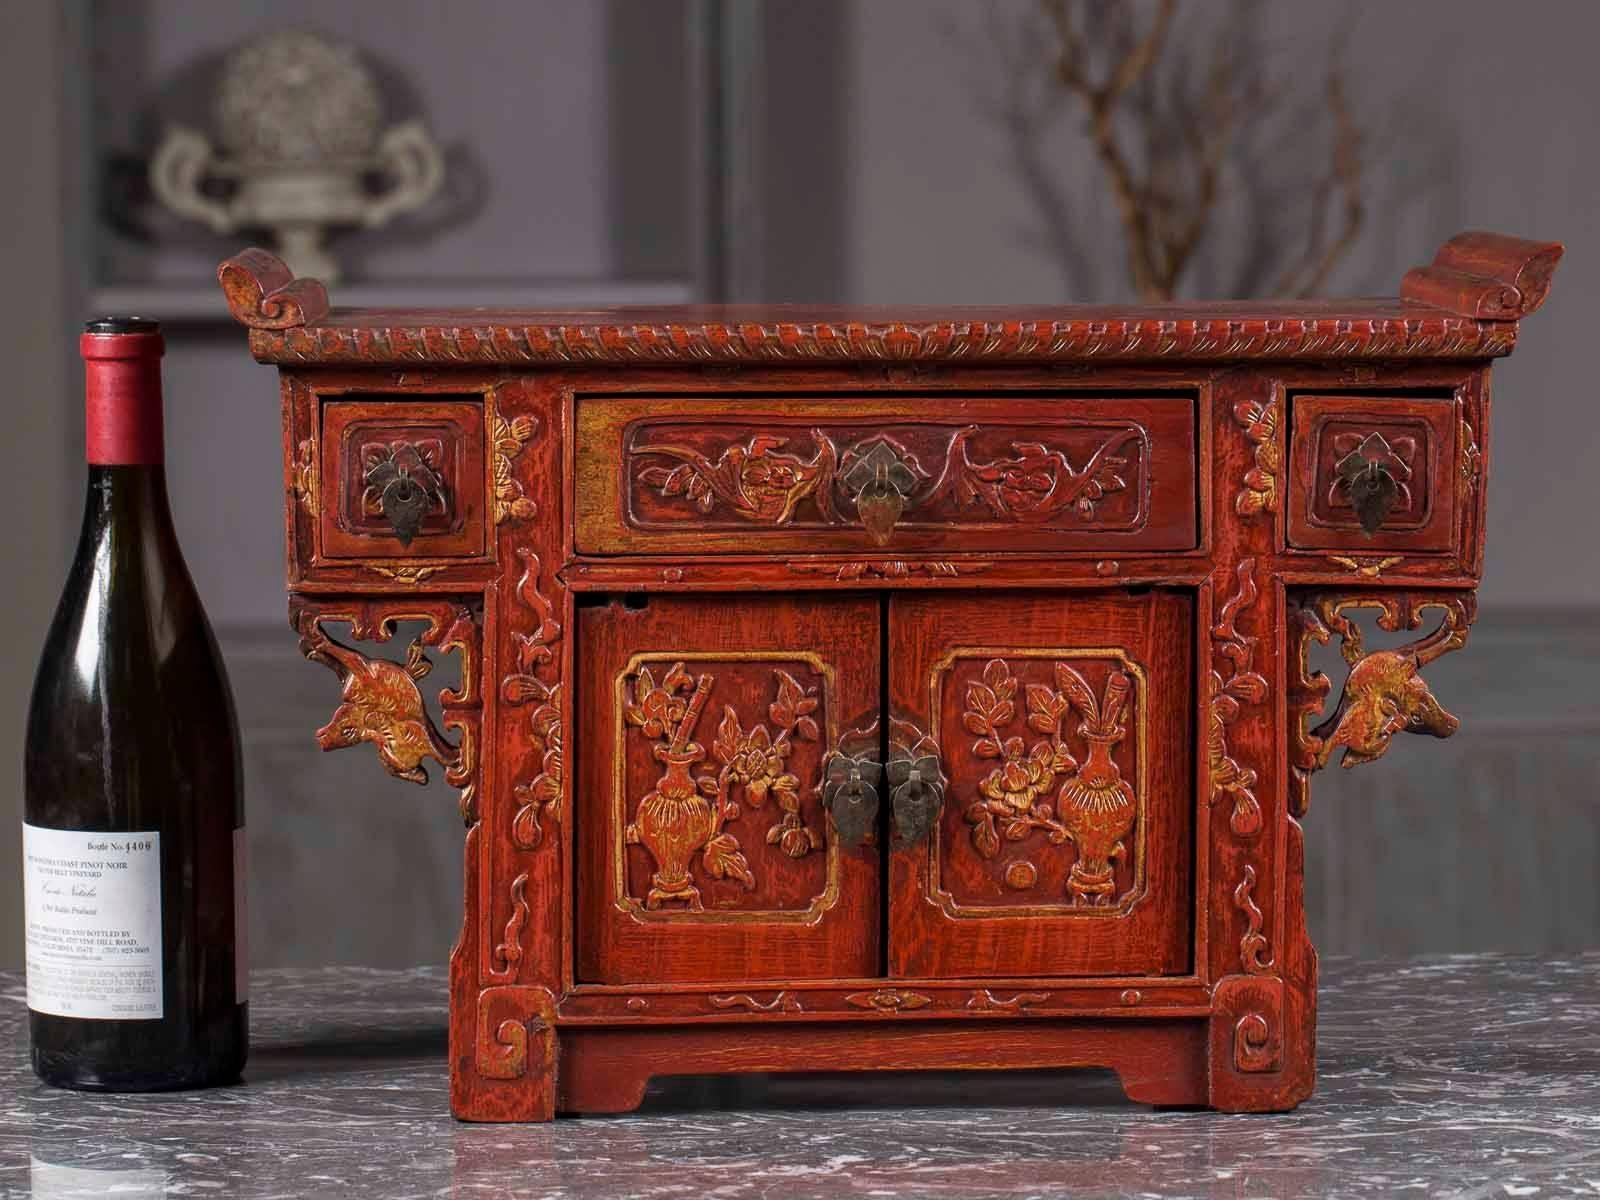 This miniature table top antique Chinese altar table buffet circa 1875 dates from the Kuang Hsu period and is correct in every detail to a full scale example. Please notice the lavish carved decoration and the red lacquer surface that retains traces